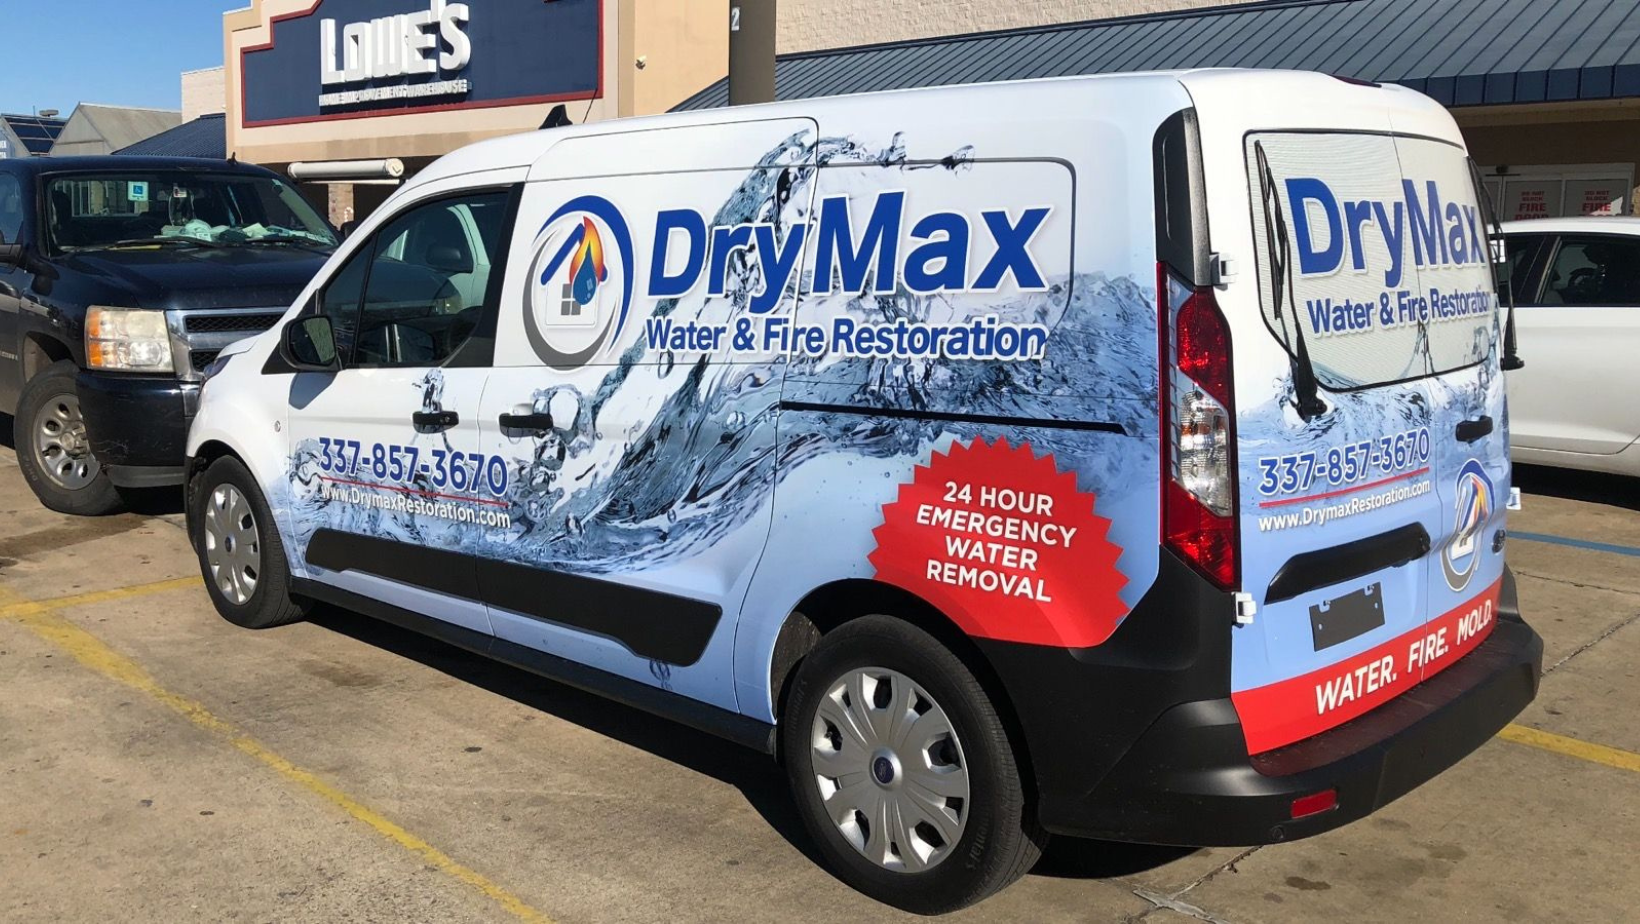 DryMax is a local water damage cleanup company in Broussard, LA